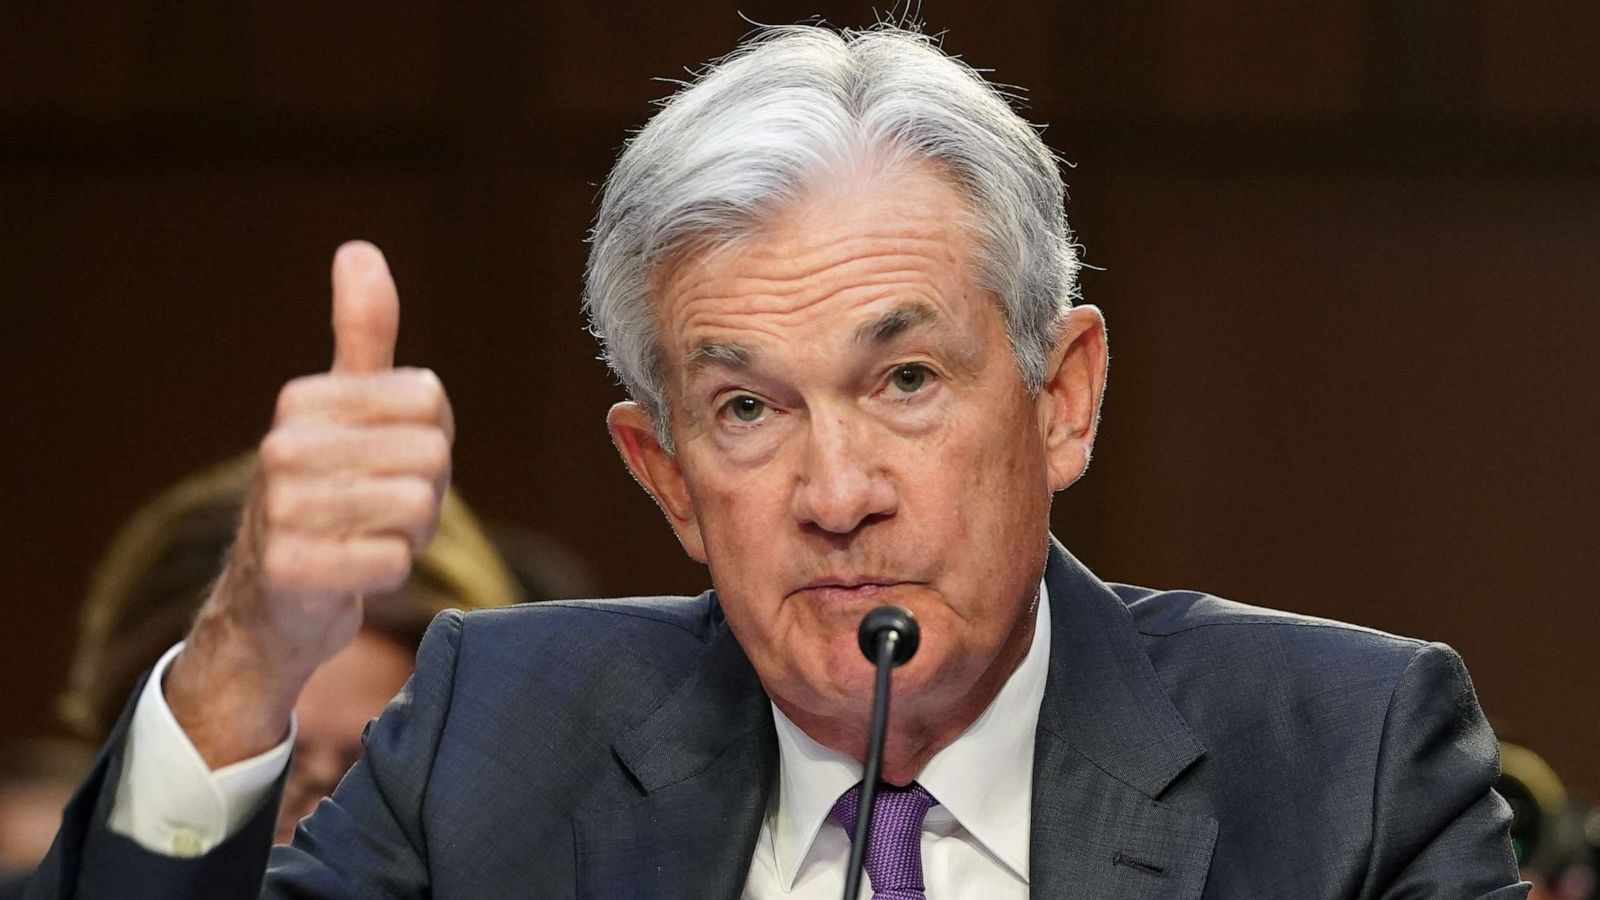 US banking system 'sound and resilient,' Fed Chair Jerome Powell says - Good Morning America